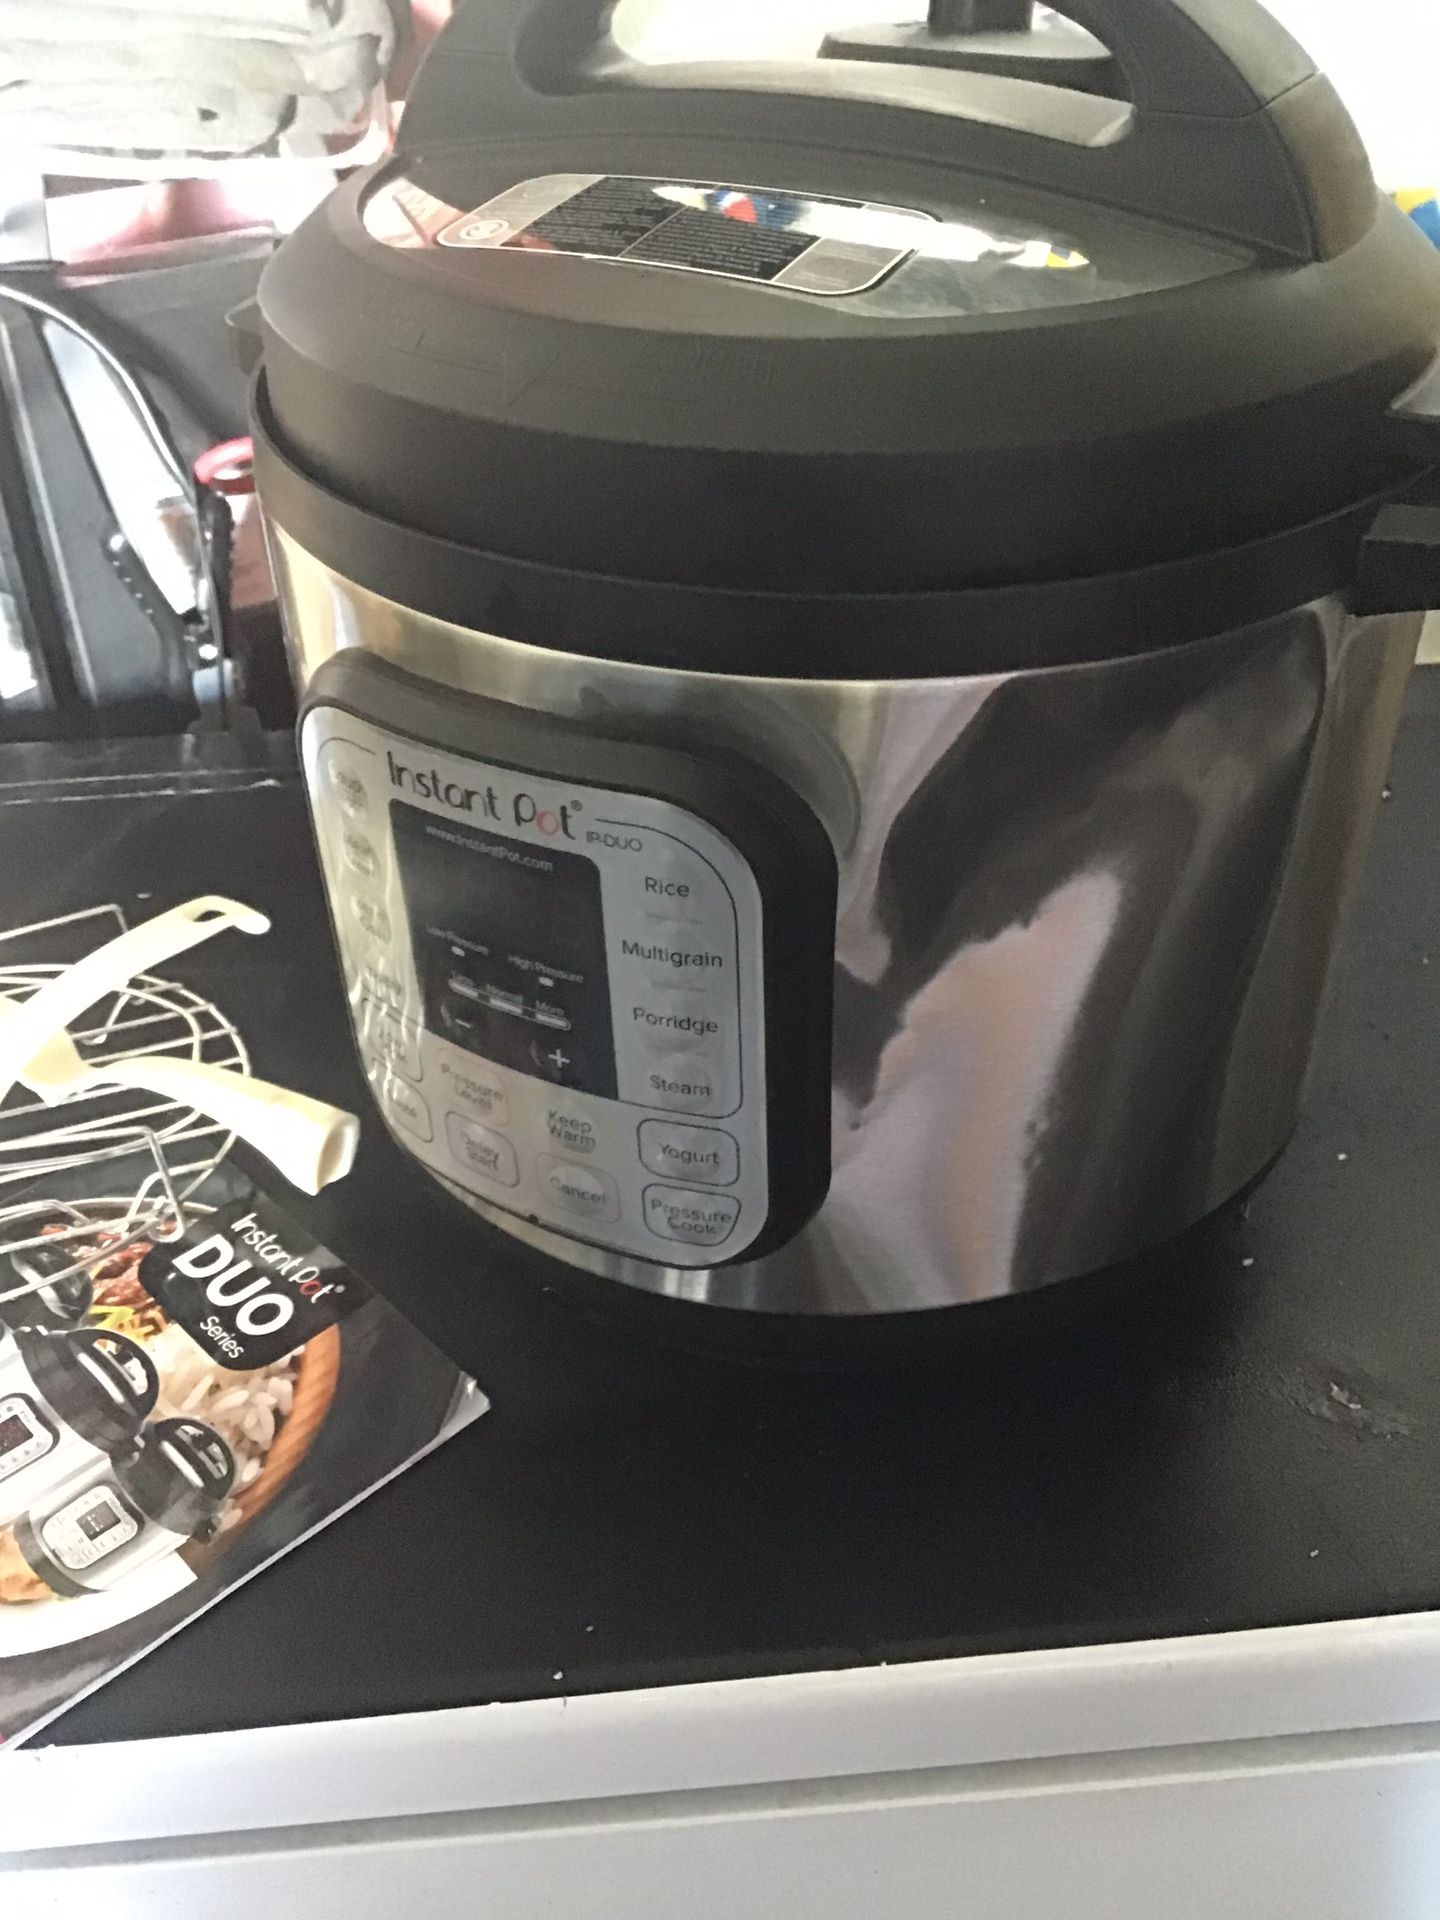 Instant pot 7 in 1 Pressure cooker / has dent as shown but Excellent working condition comes with accessories / 6 qt sold as is